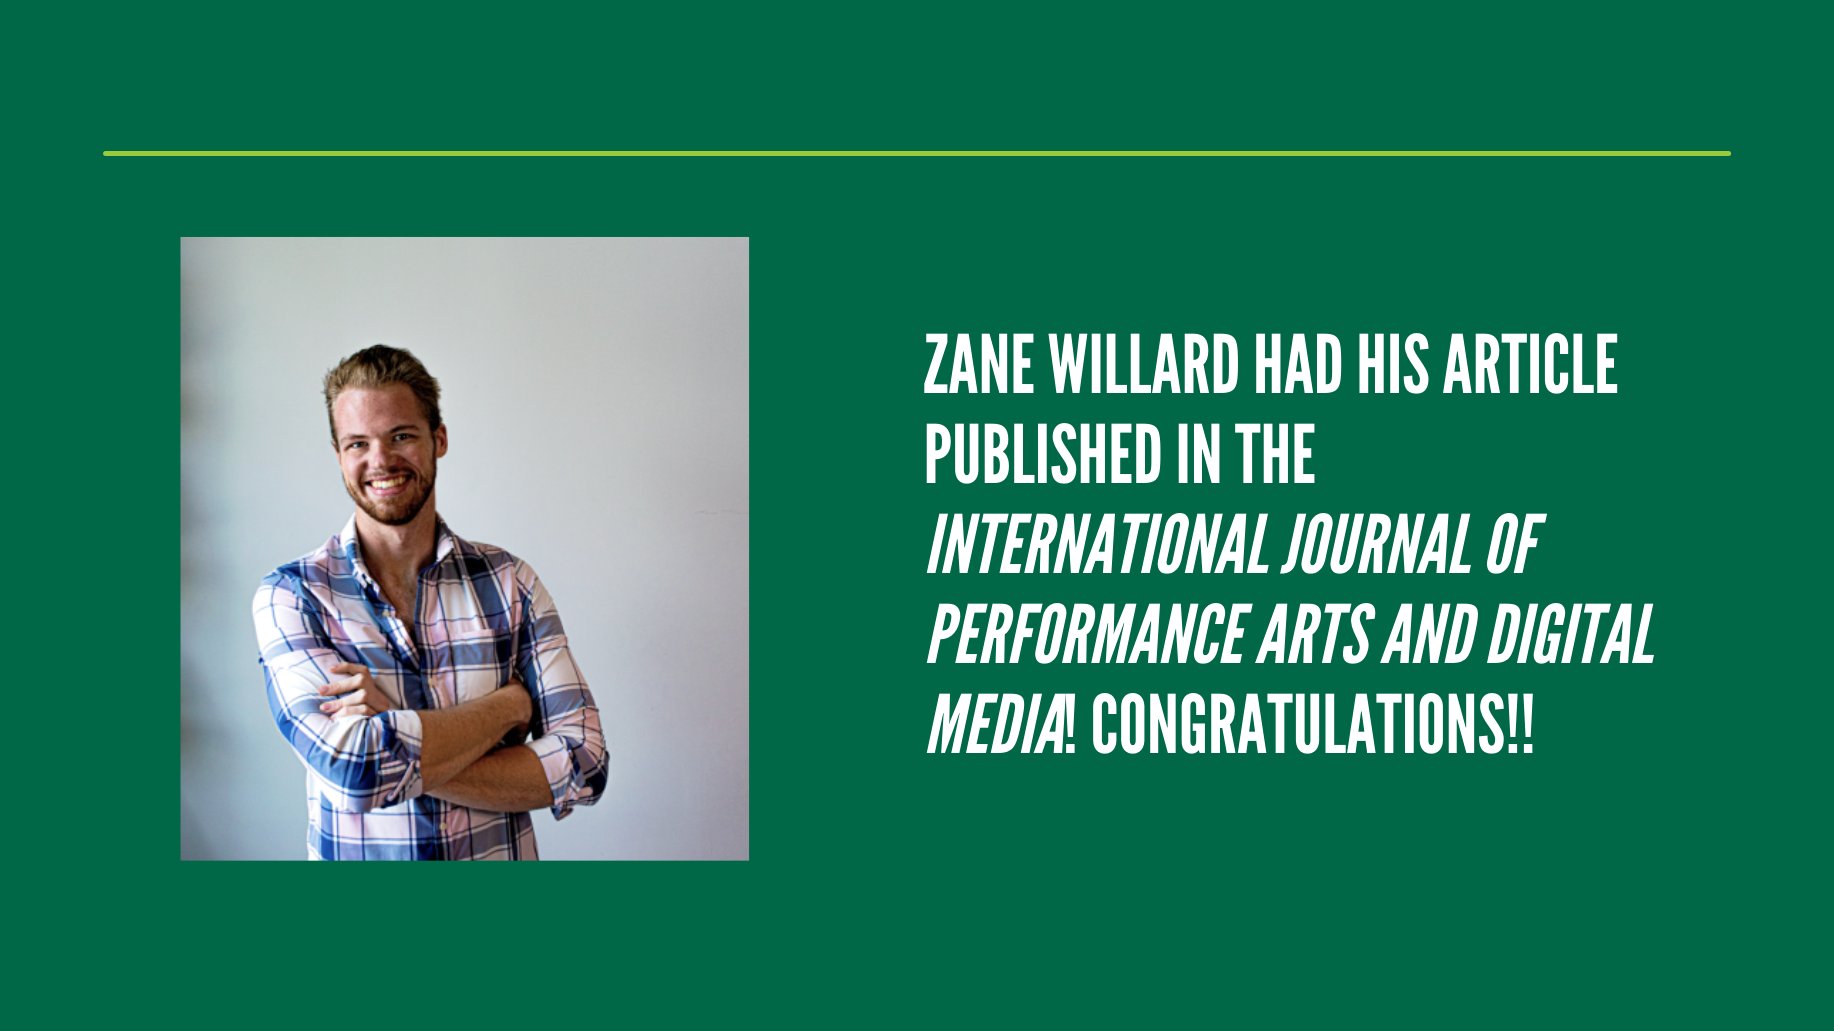 Zane Willard was published in the International Journal of Performance Arts and Digital Media